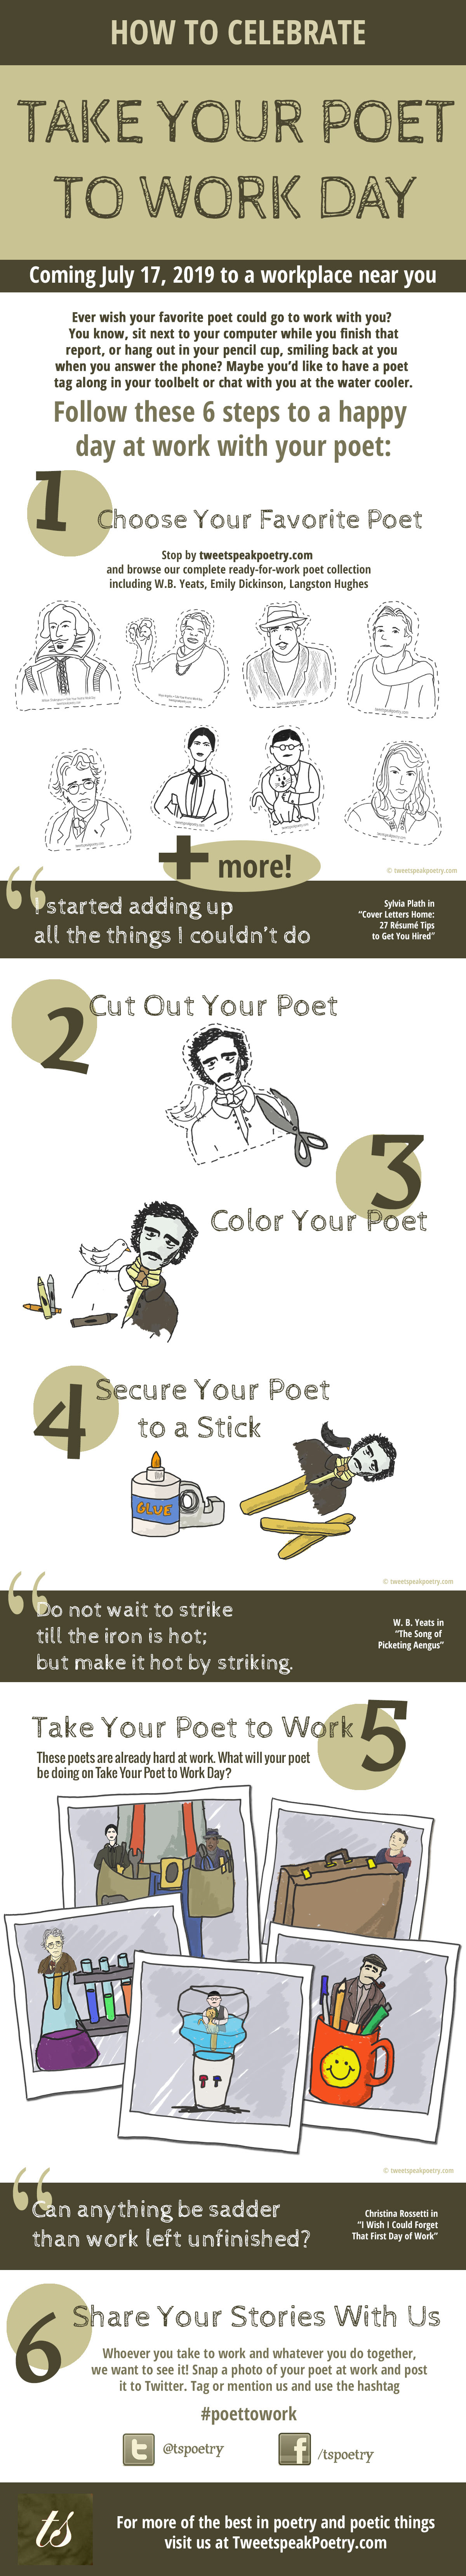 Take Your Poet to Work Day 2019 Infographic